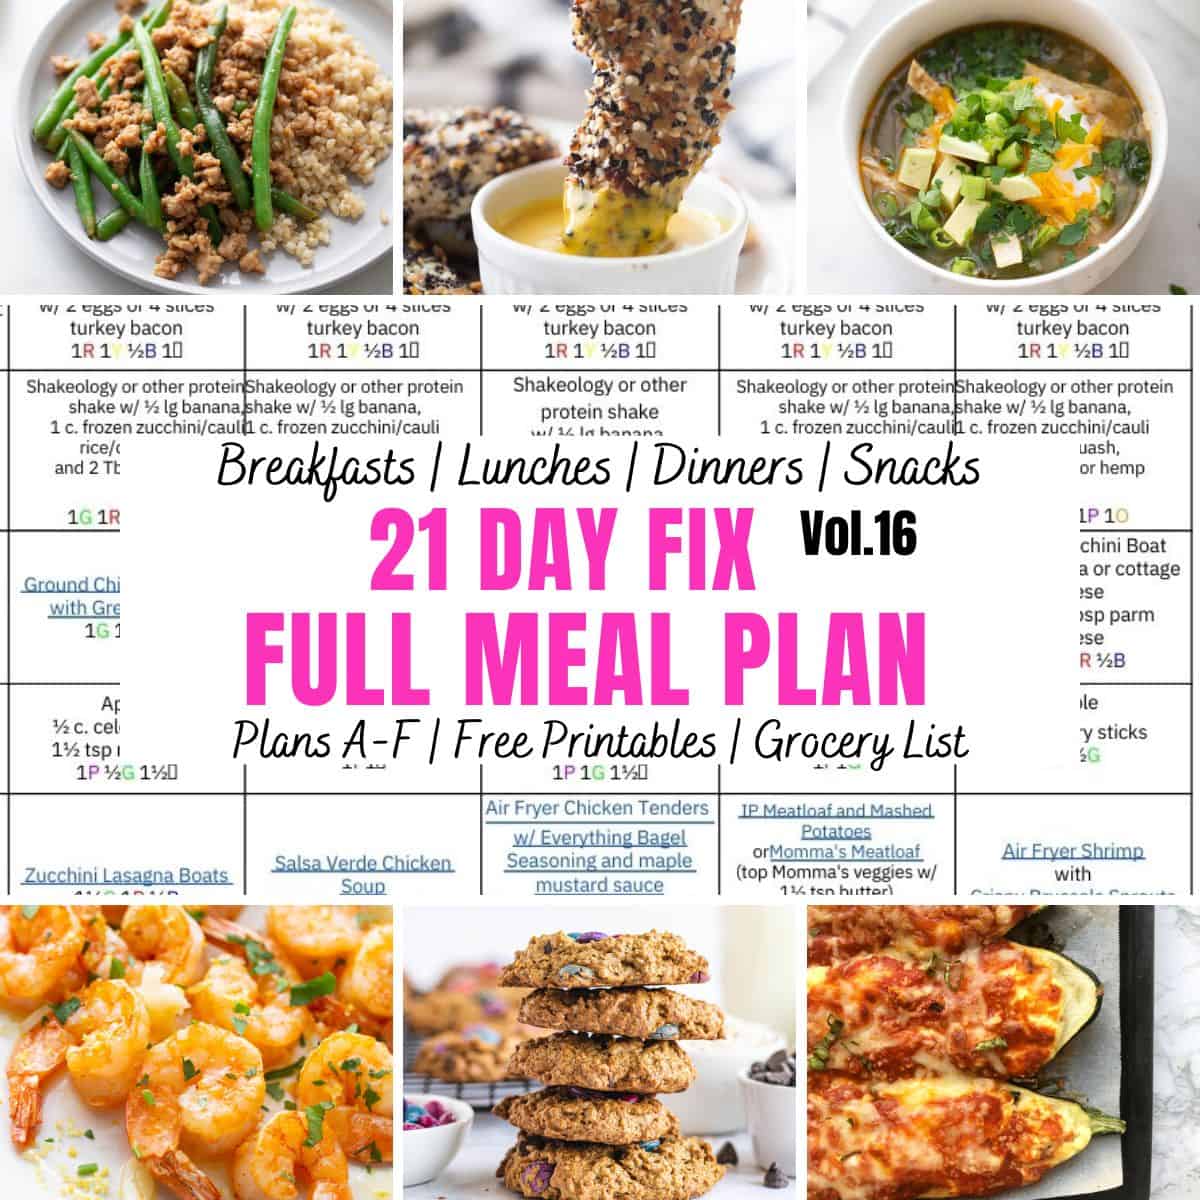 Refrigerator Organization and Meal Planning Tips (FREE Printable!)